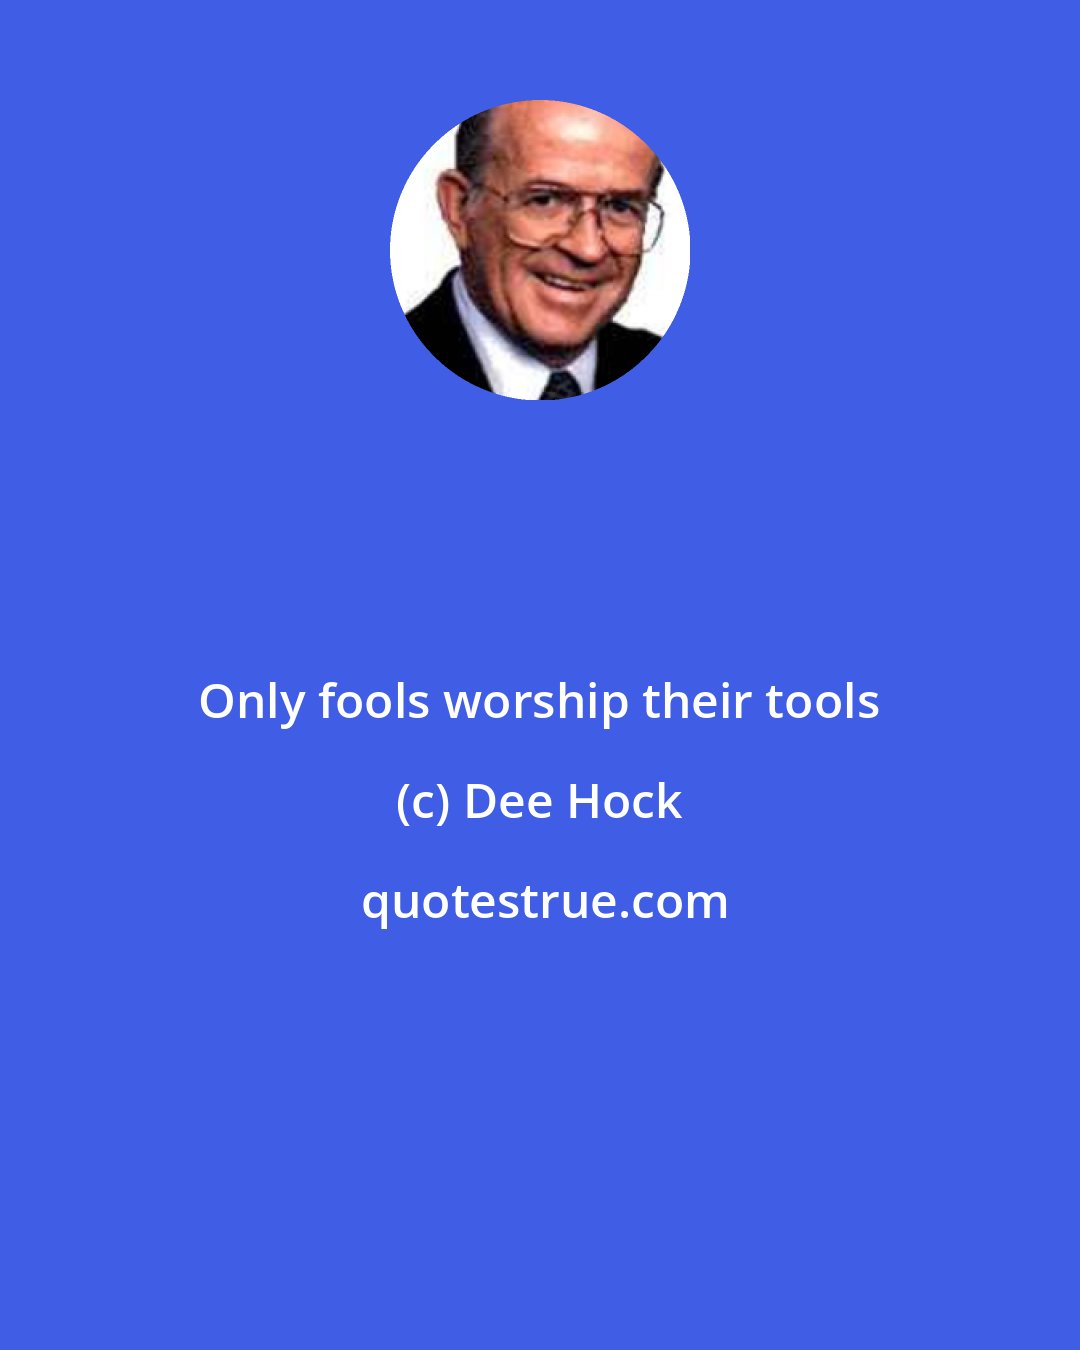 Dee Hock: Only fools worship their tools